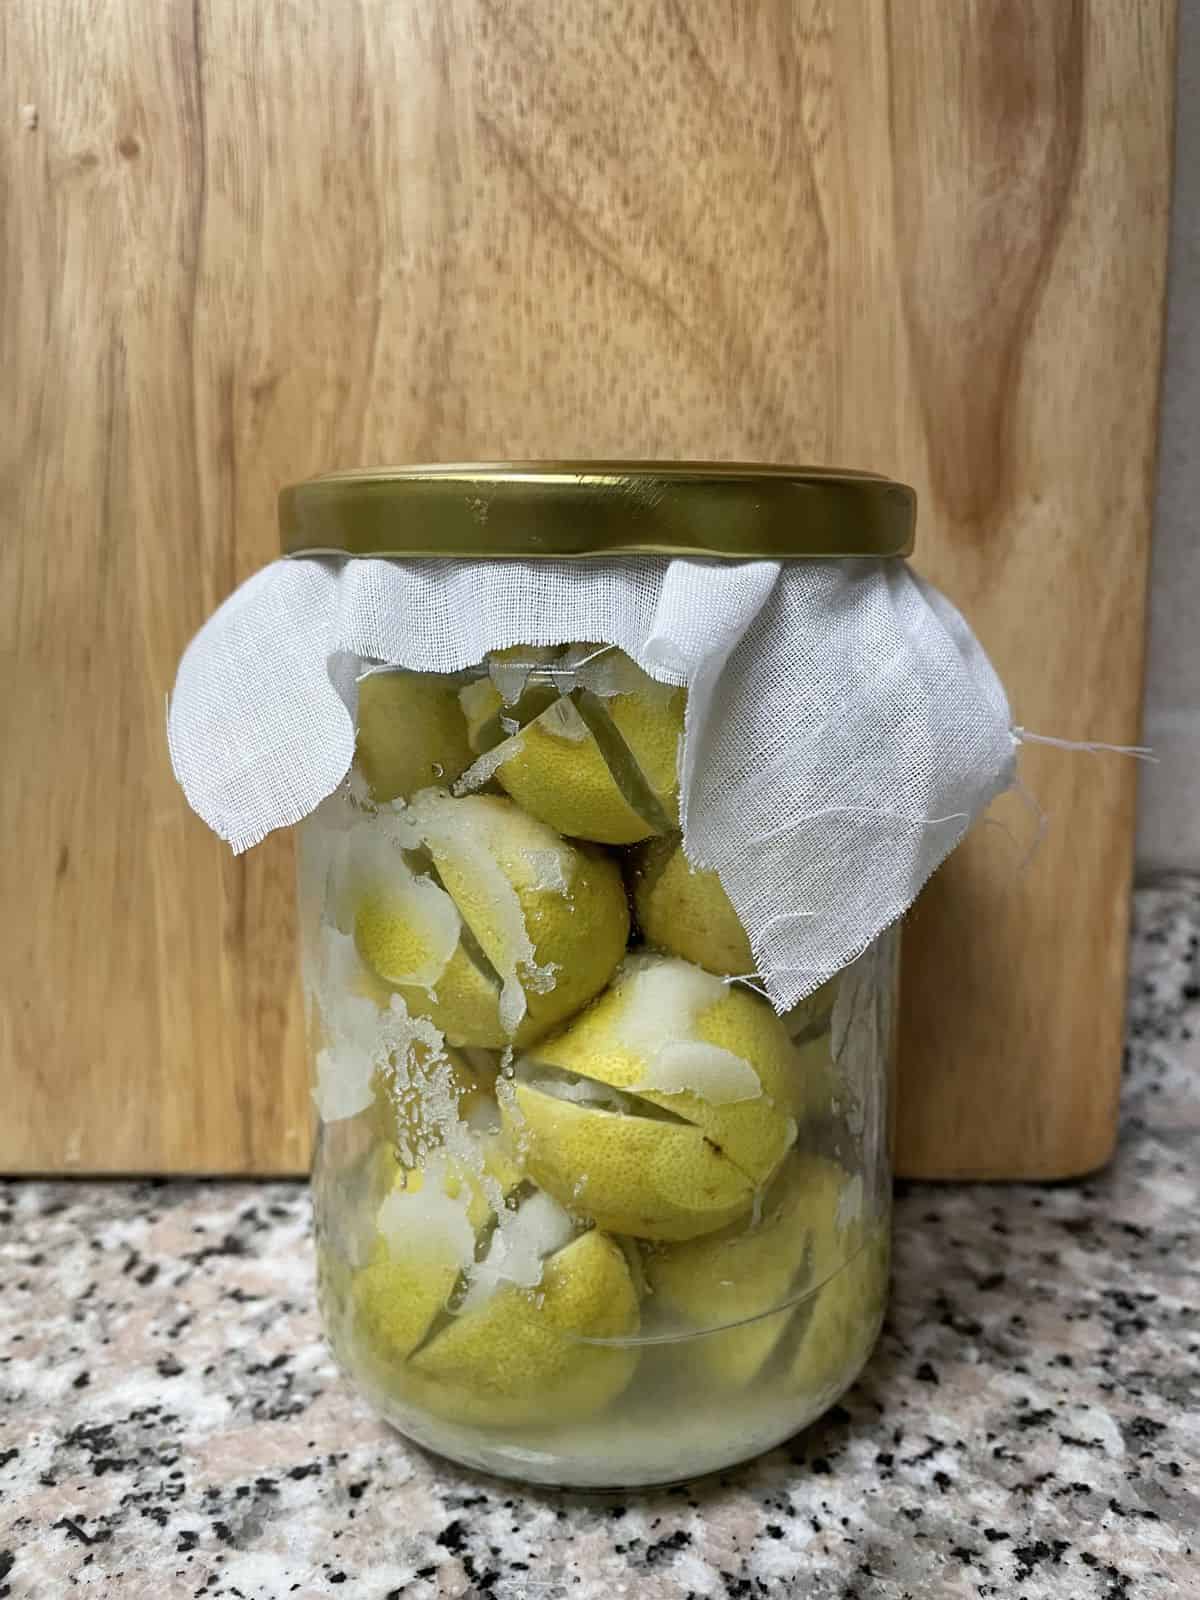 A jar of salted lime for preserving.